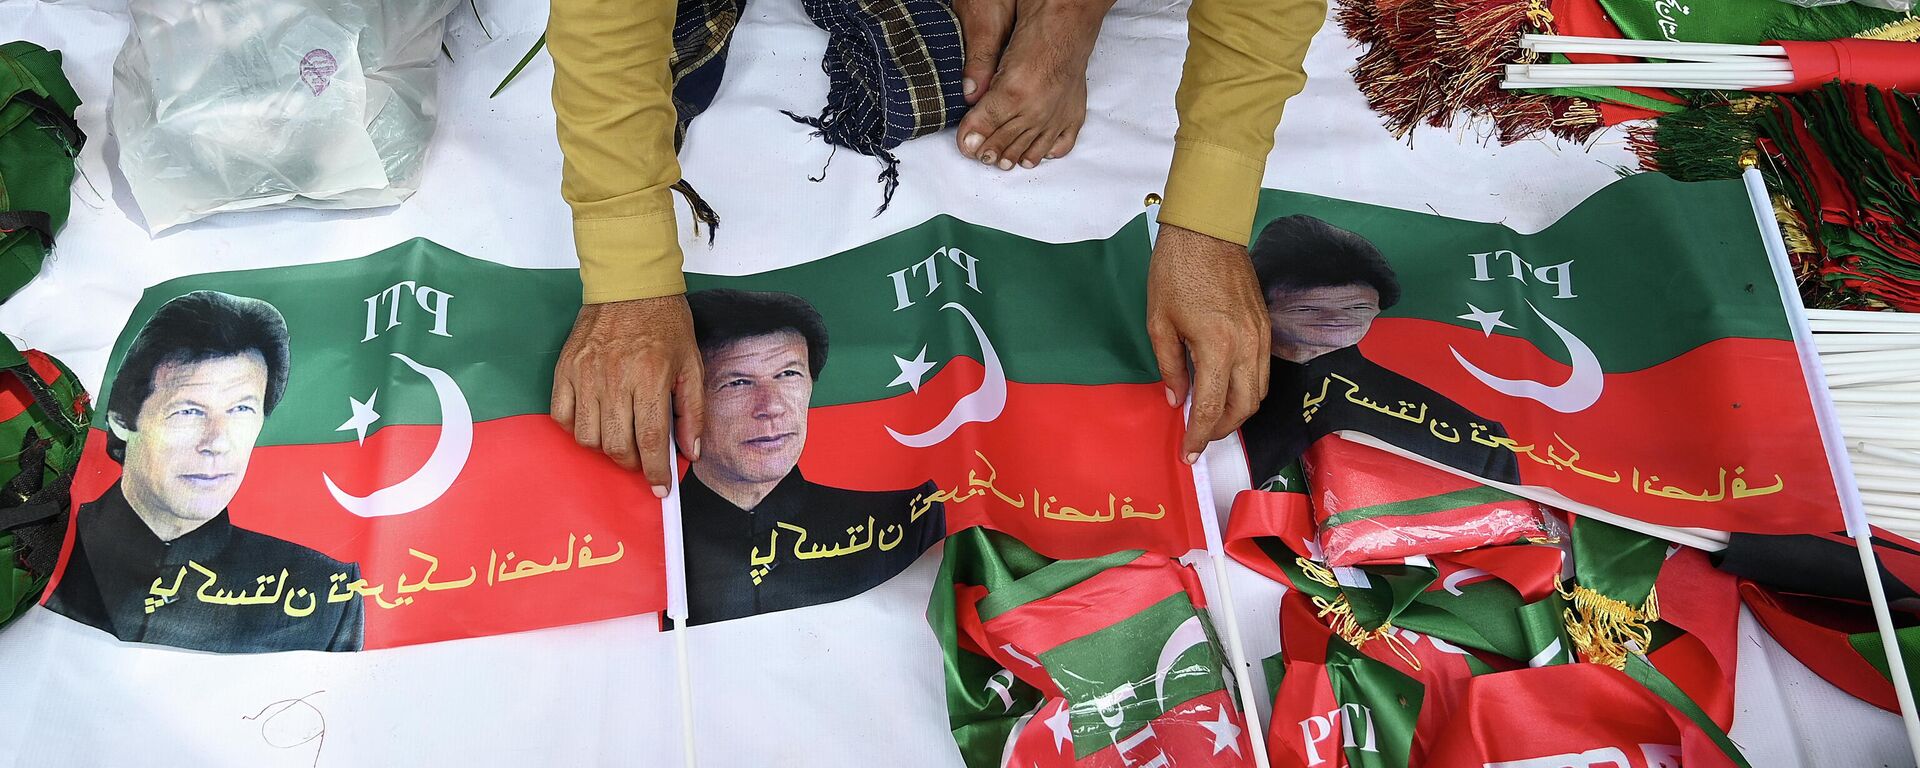 A vendor sells flags of Pakistan Tehreek-e-Insaf (PTI) party portraying Pakistan's former prime minister Imran Khan, outside the Khan's residence in Islamabad on August 22, 2022. - Sputnik International, 1920, 22.08.2022